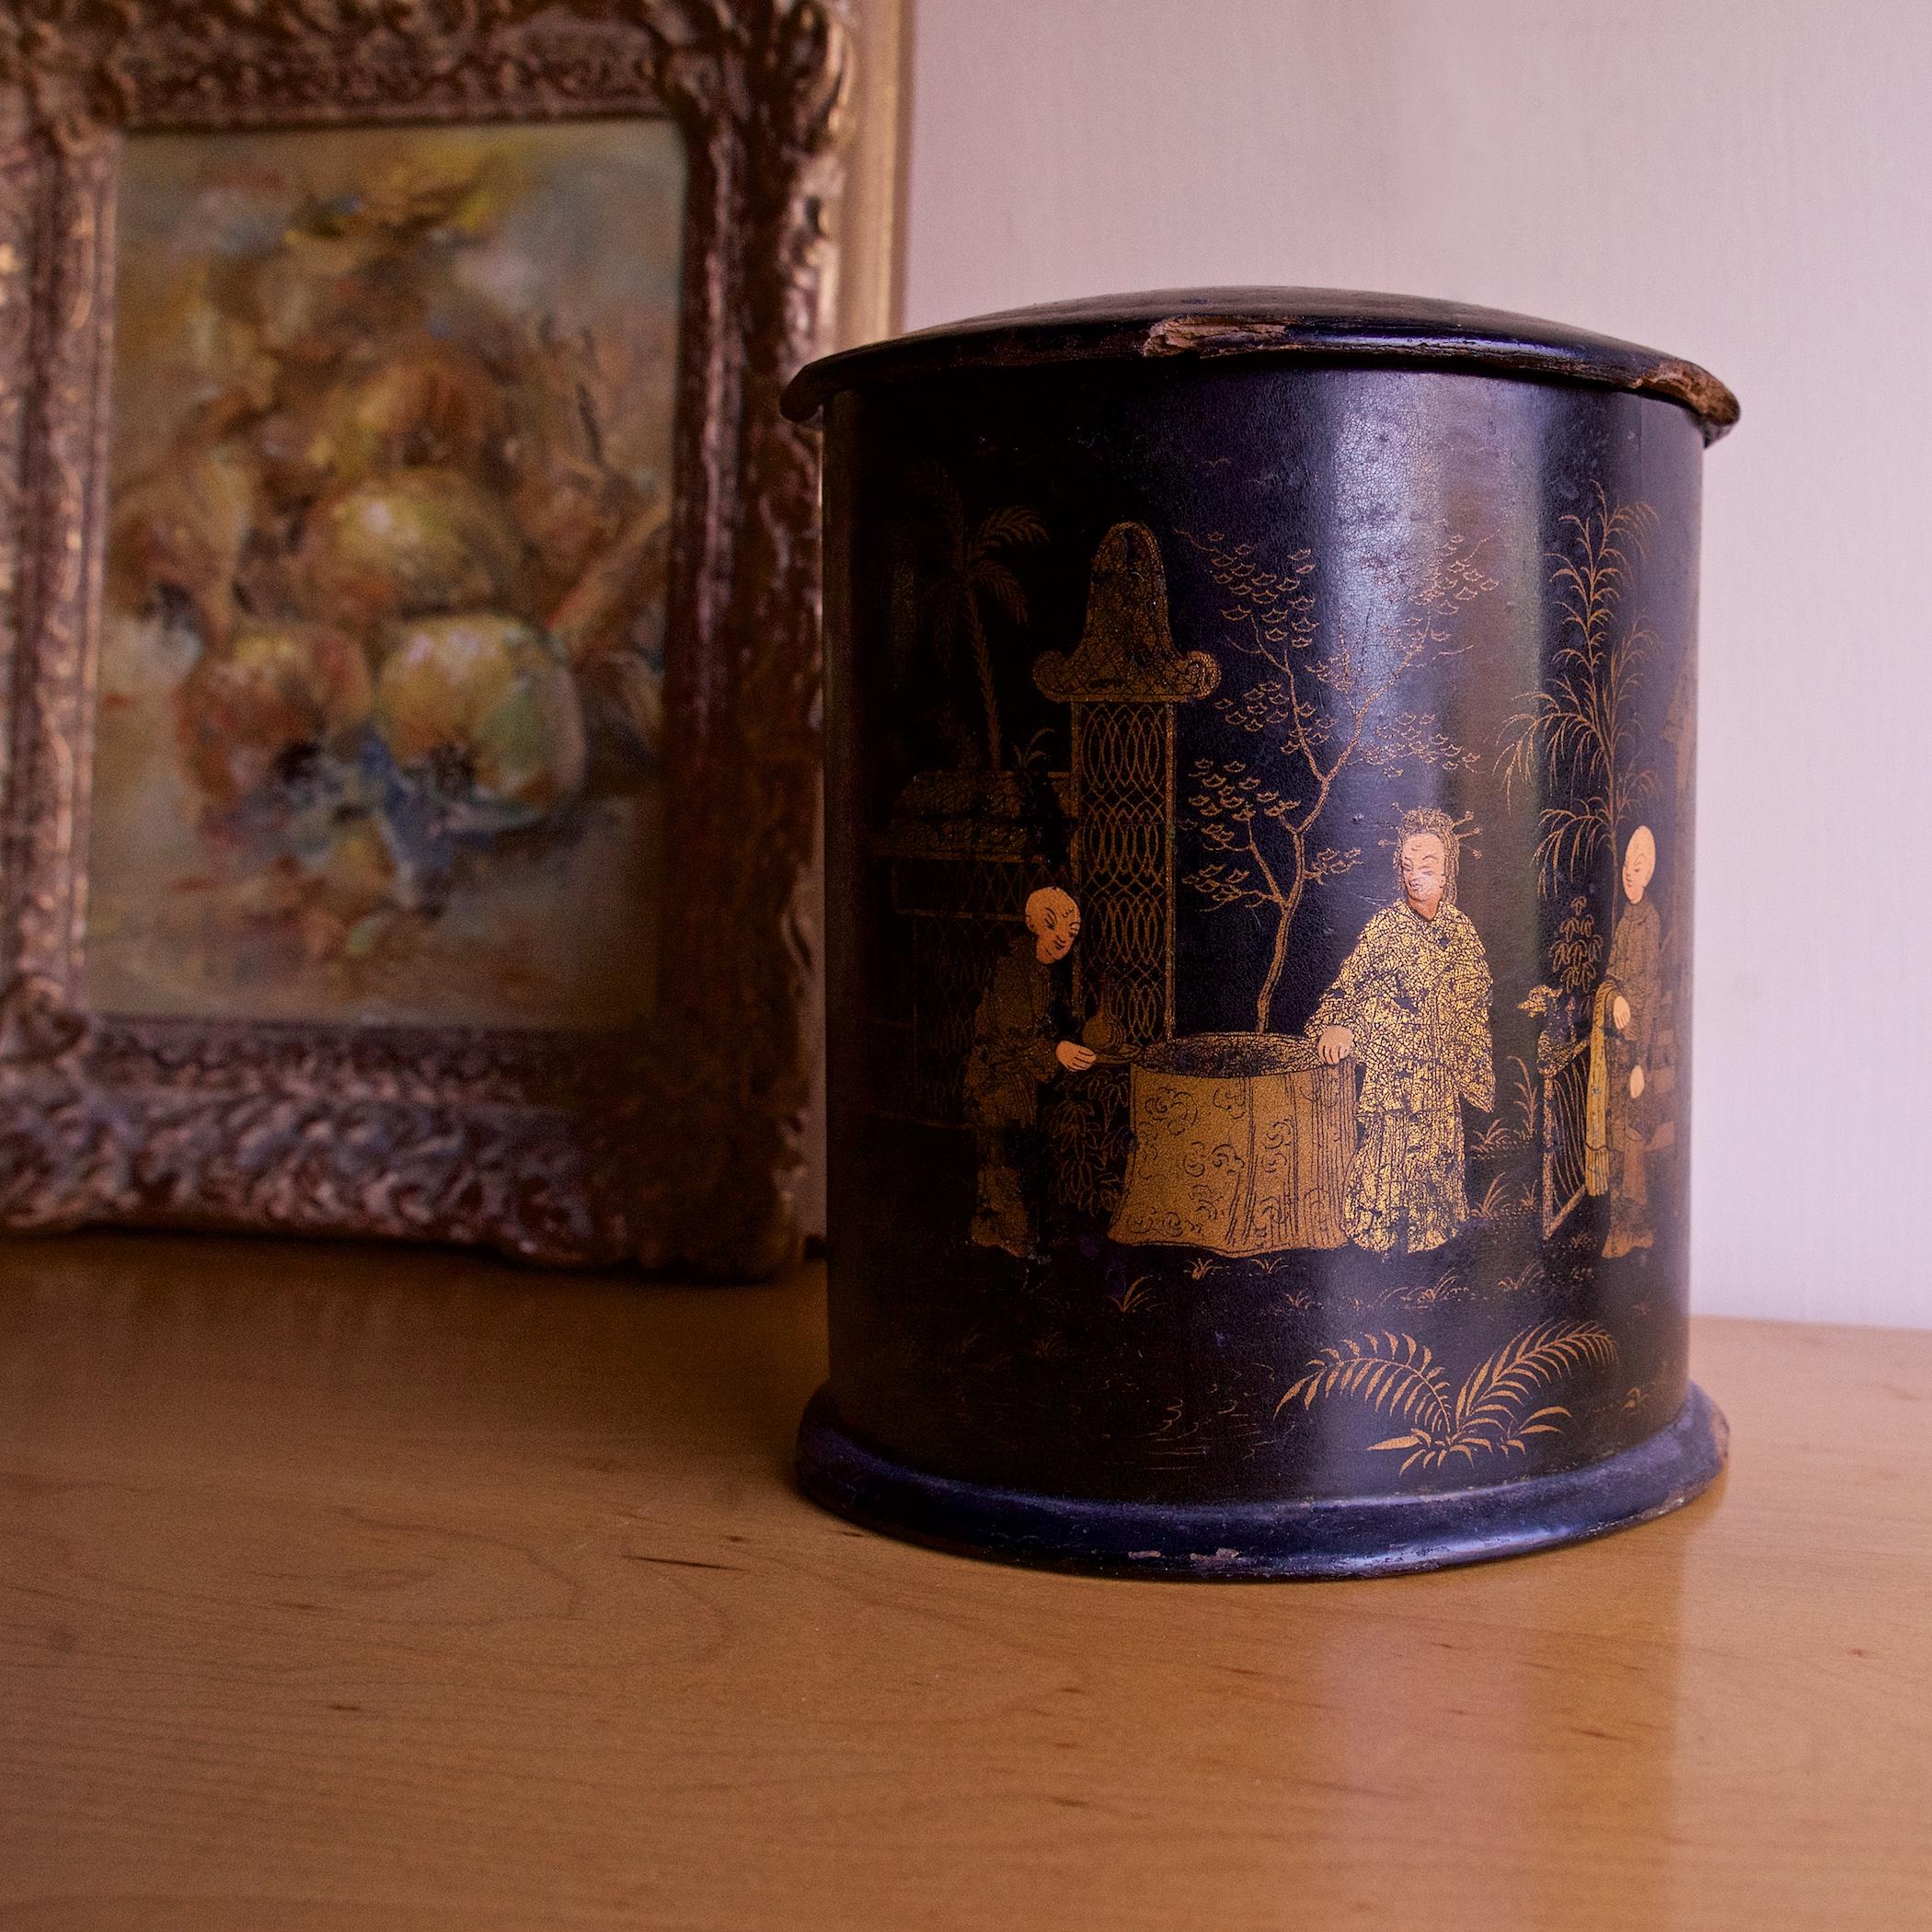 A large English lacquered papier-mâché container from the Aesthetic Movement period, featuring a decorative chinoserie painting of stylized Asian figures, pagodas, and a garden bridge.  Silver foil lined interior, and floating inner lid.  6 inches